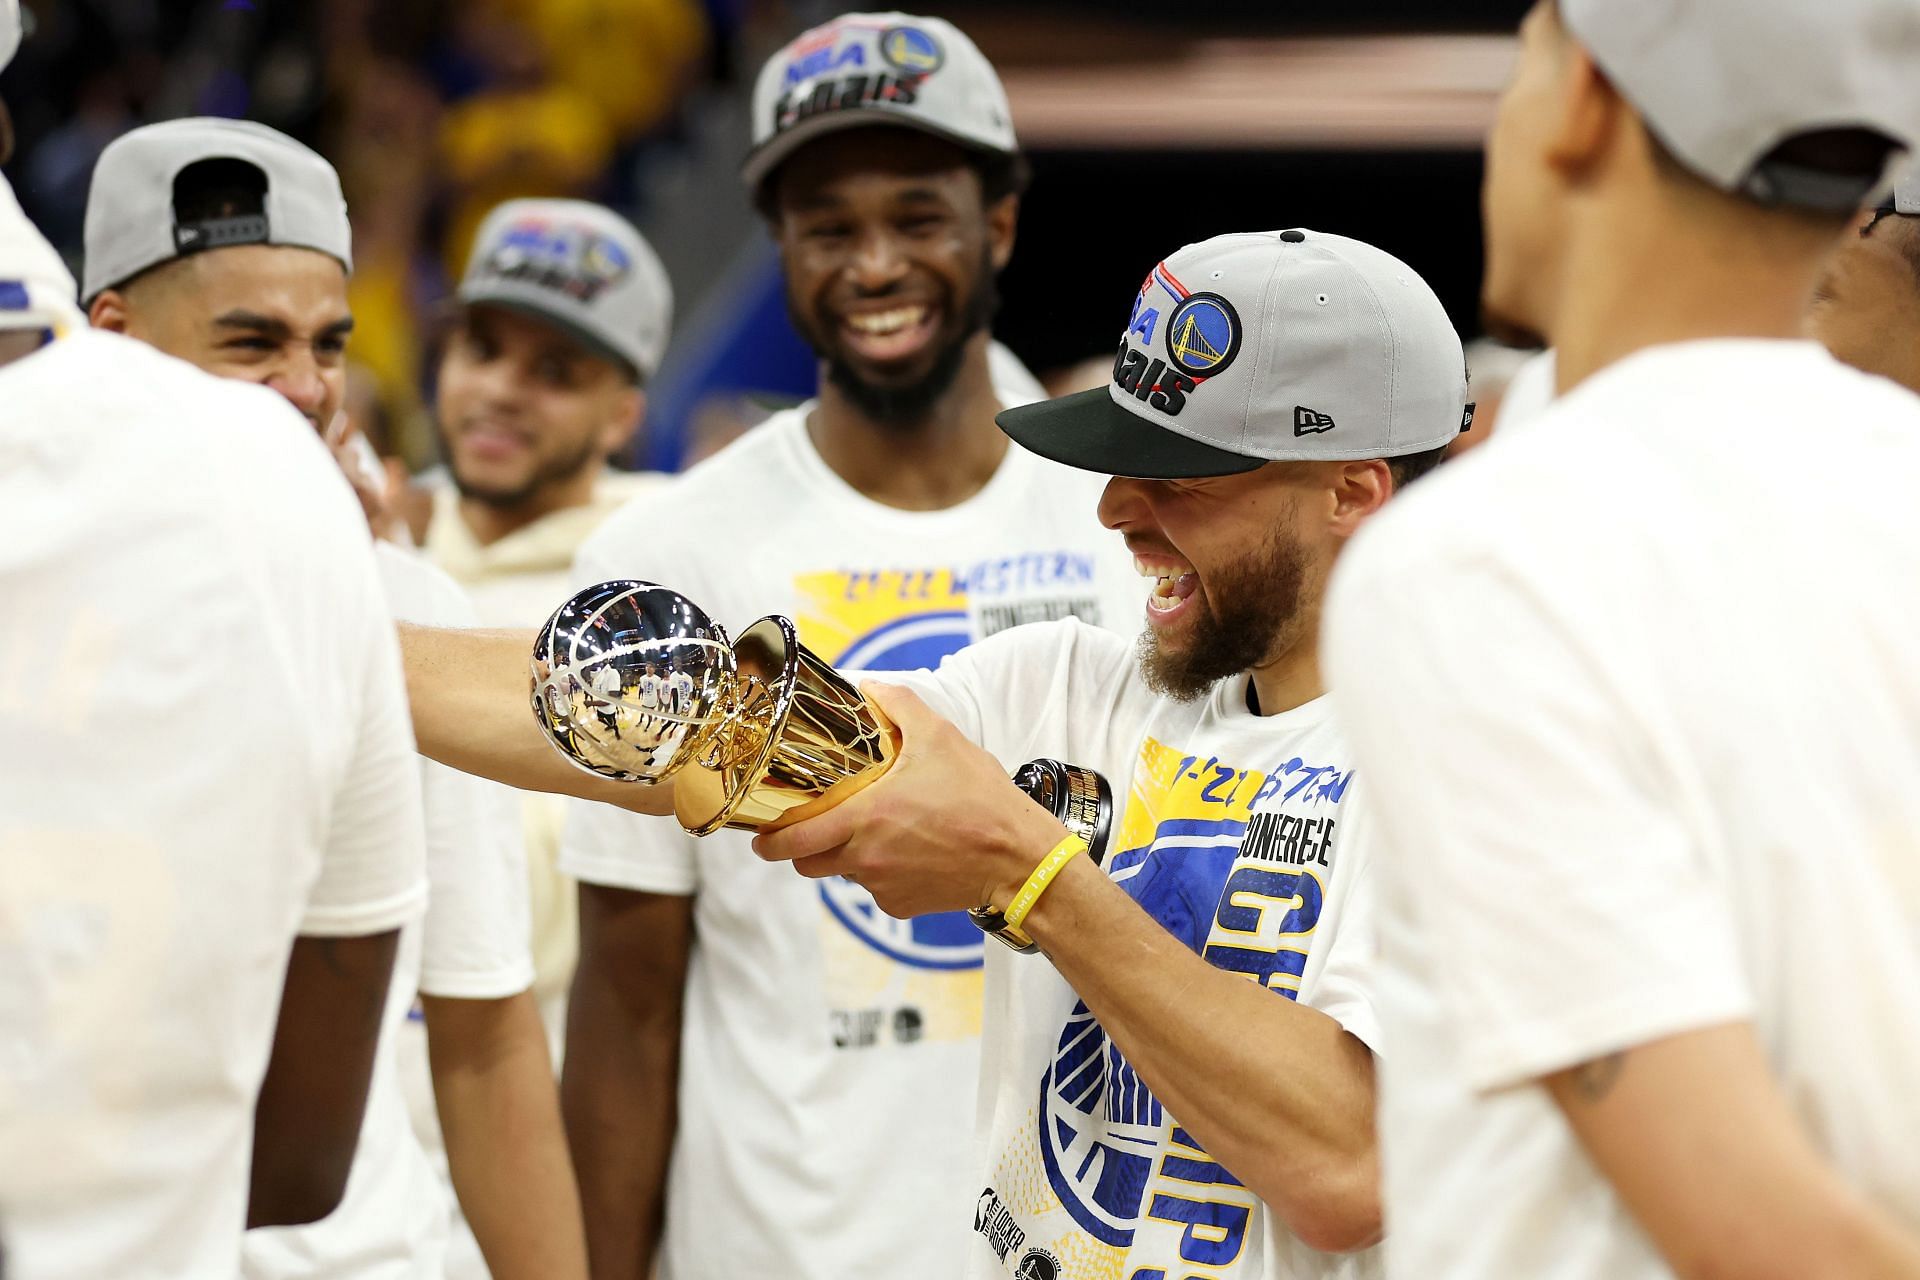 Steph Curry could add the NBA Finals MVP to his collection this season.